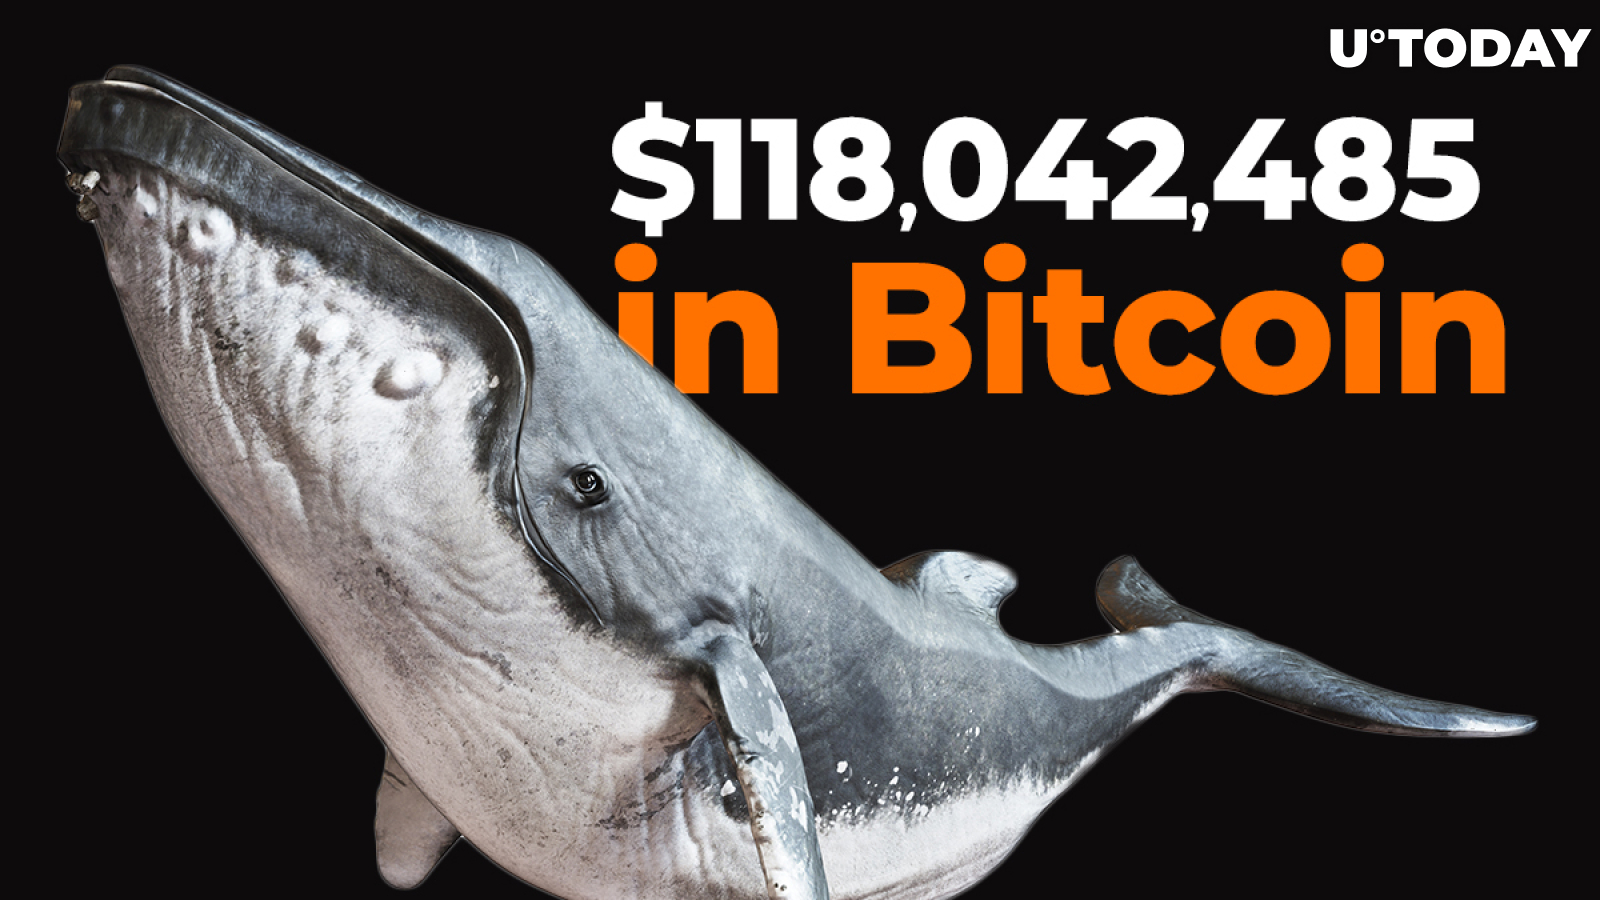 Crypto Whales Shift $118,042,485 in Bitcoin as BTC Hangs Below $10,500